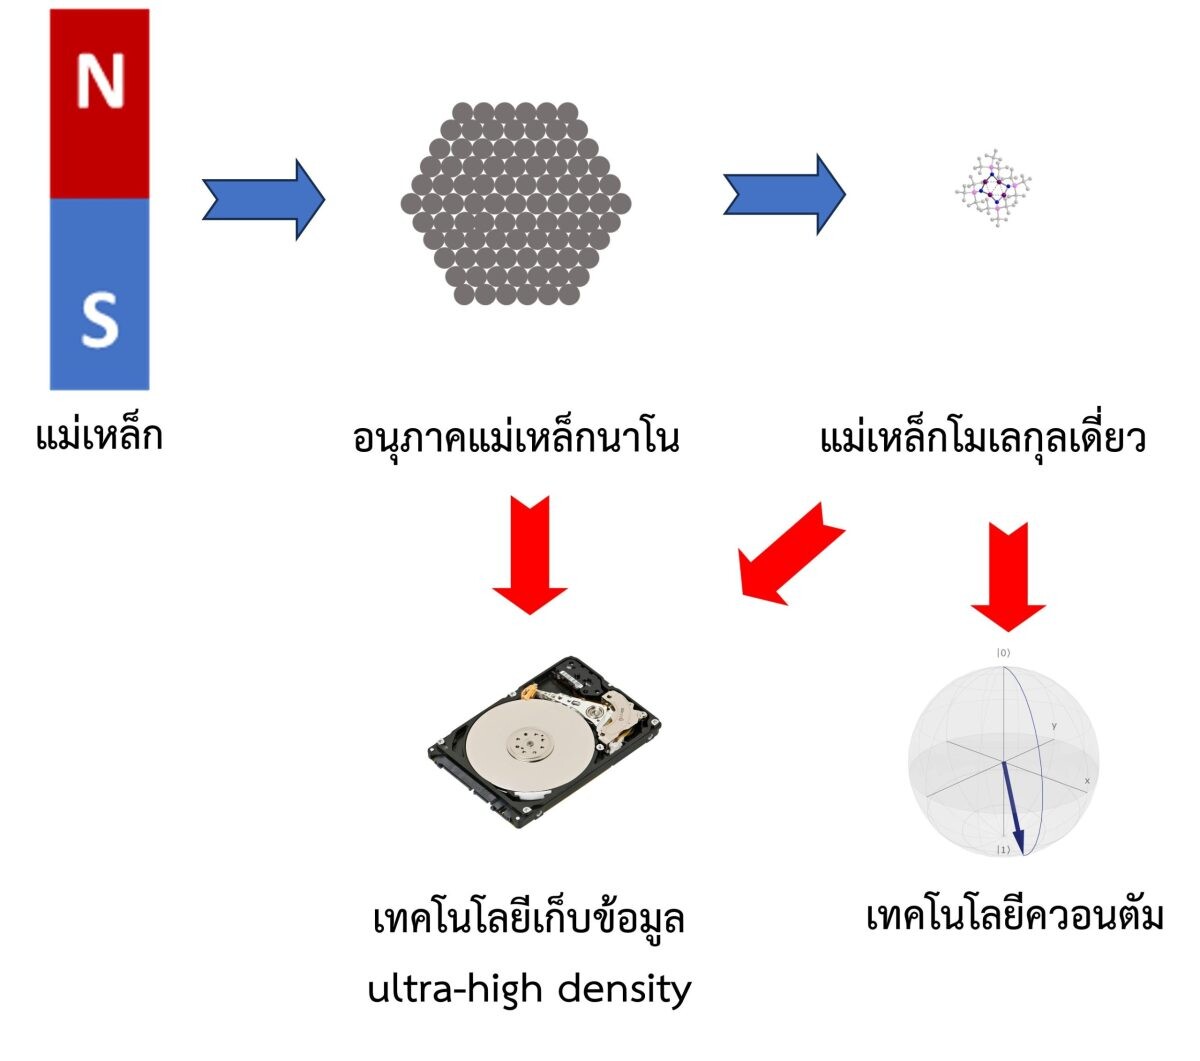 Mahidol University is developing innovations to increase the potential of quantum computing technology using molecular magnets.